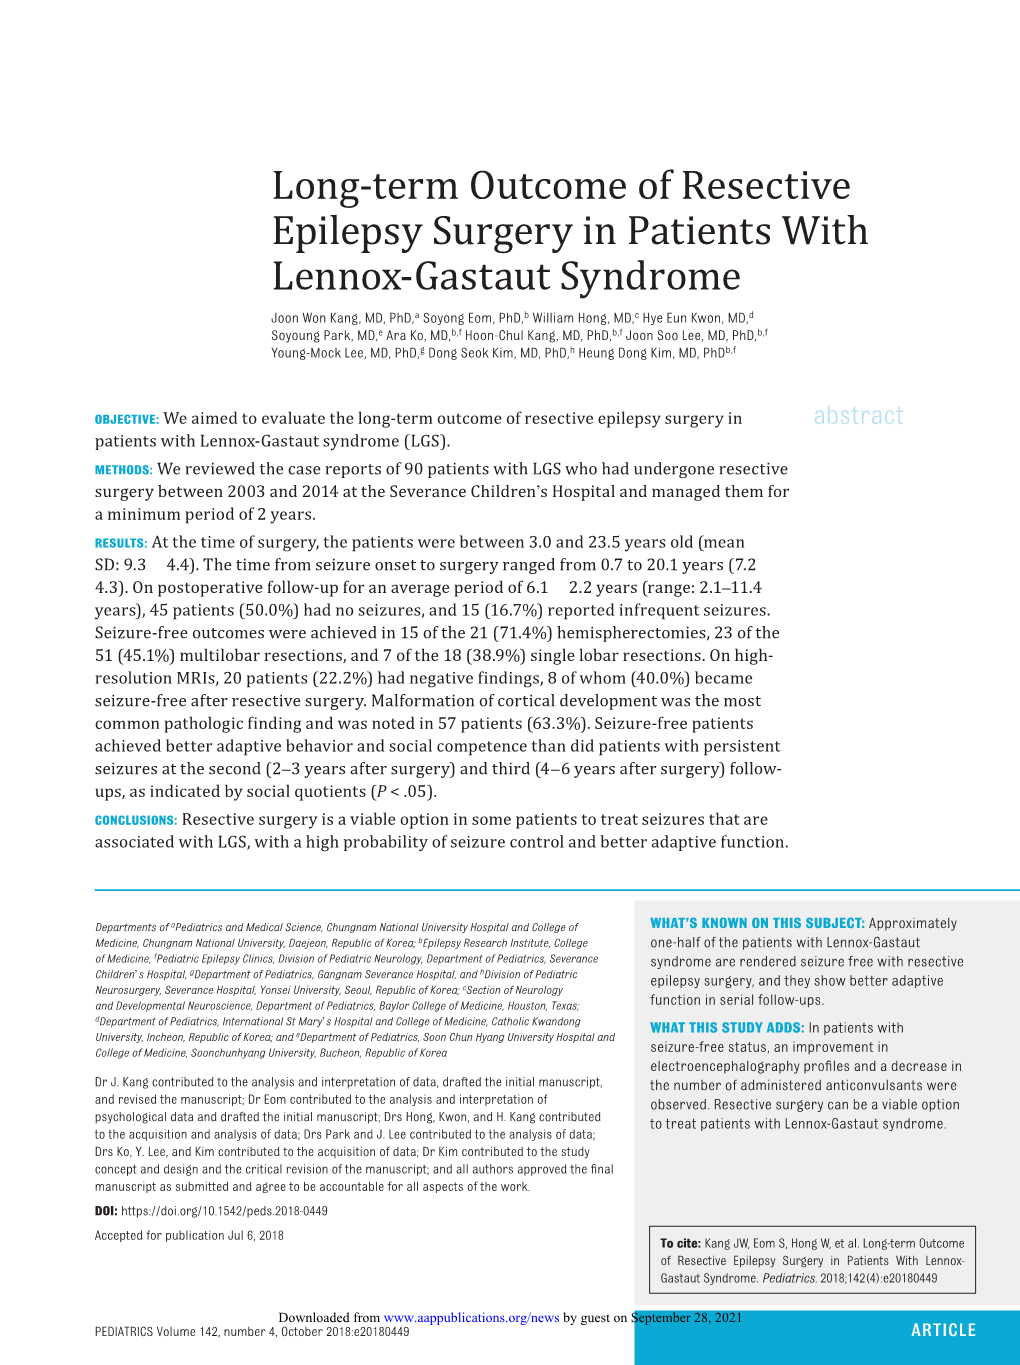 Long-Term Outcome of Resective Epilepsy Surgery in Patients with Lennox- Gastaut Syndrome